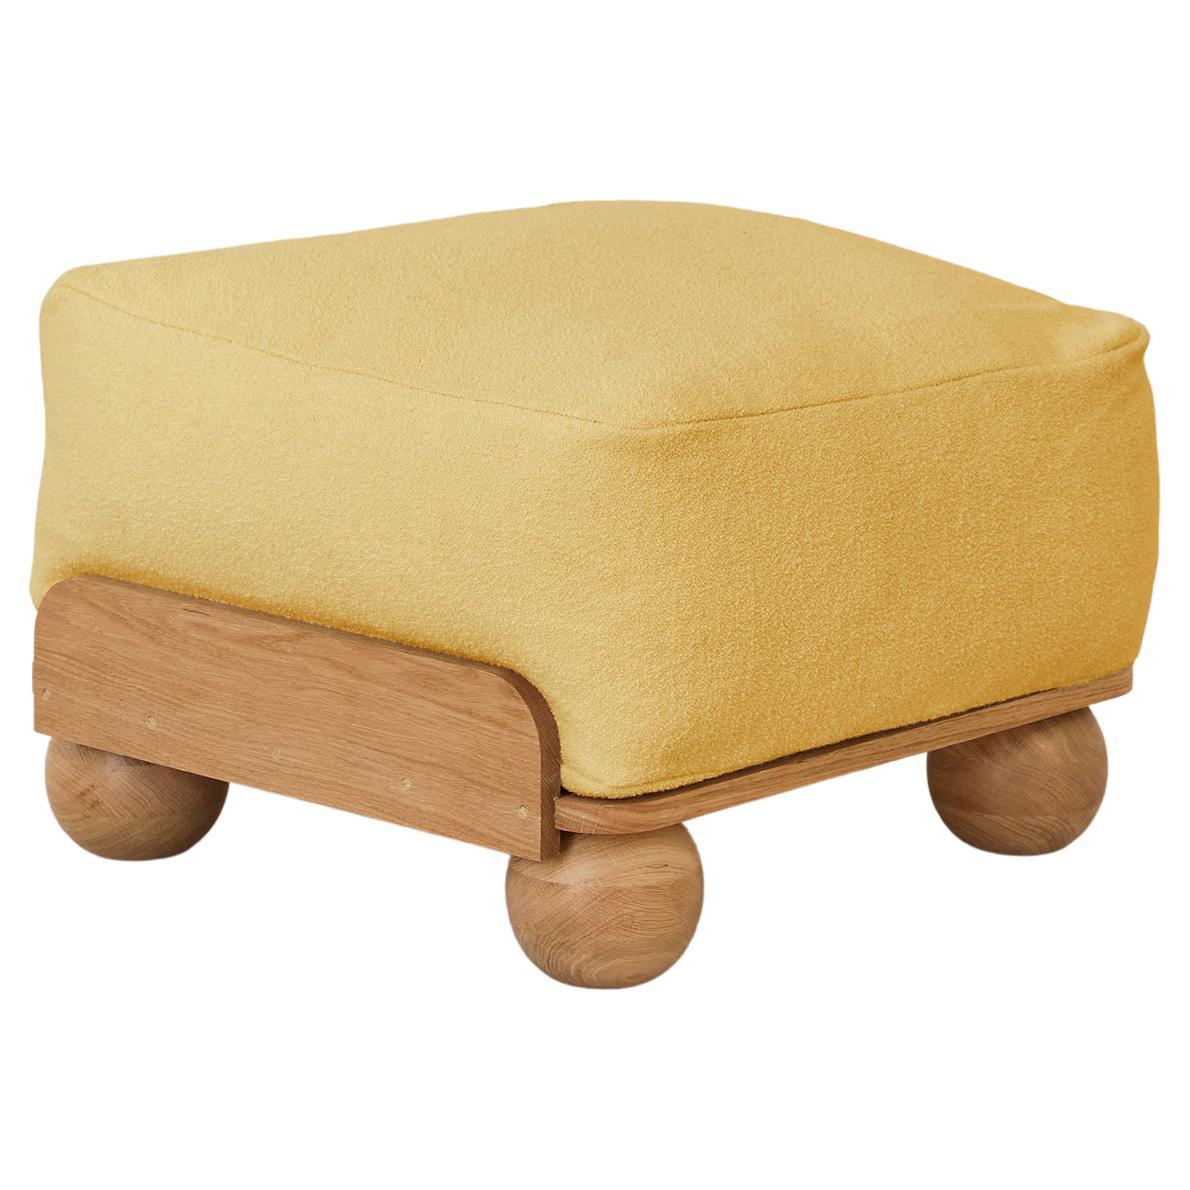 Cove Footstool in Straw Yellow For Sale